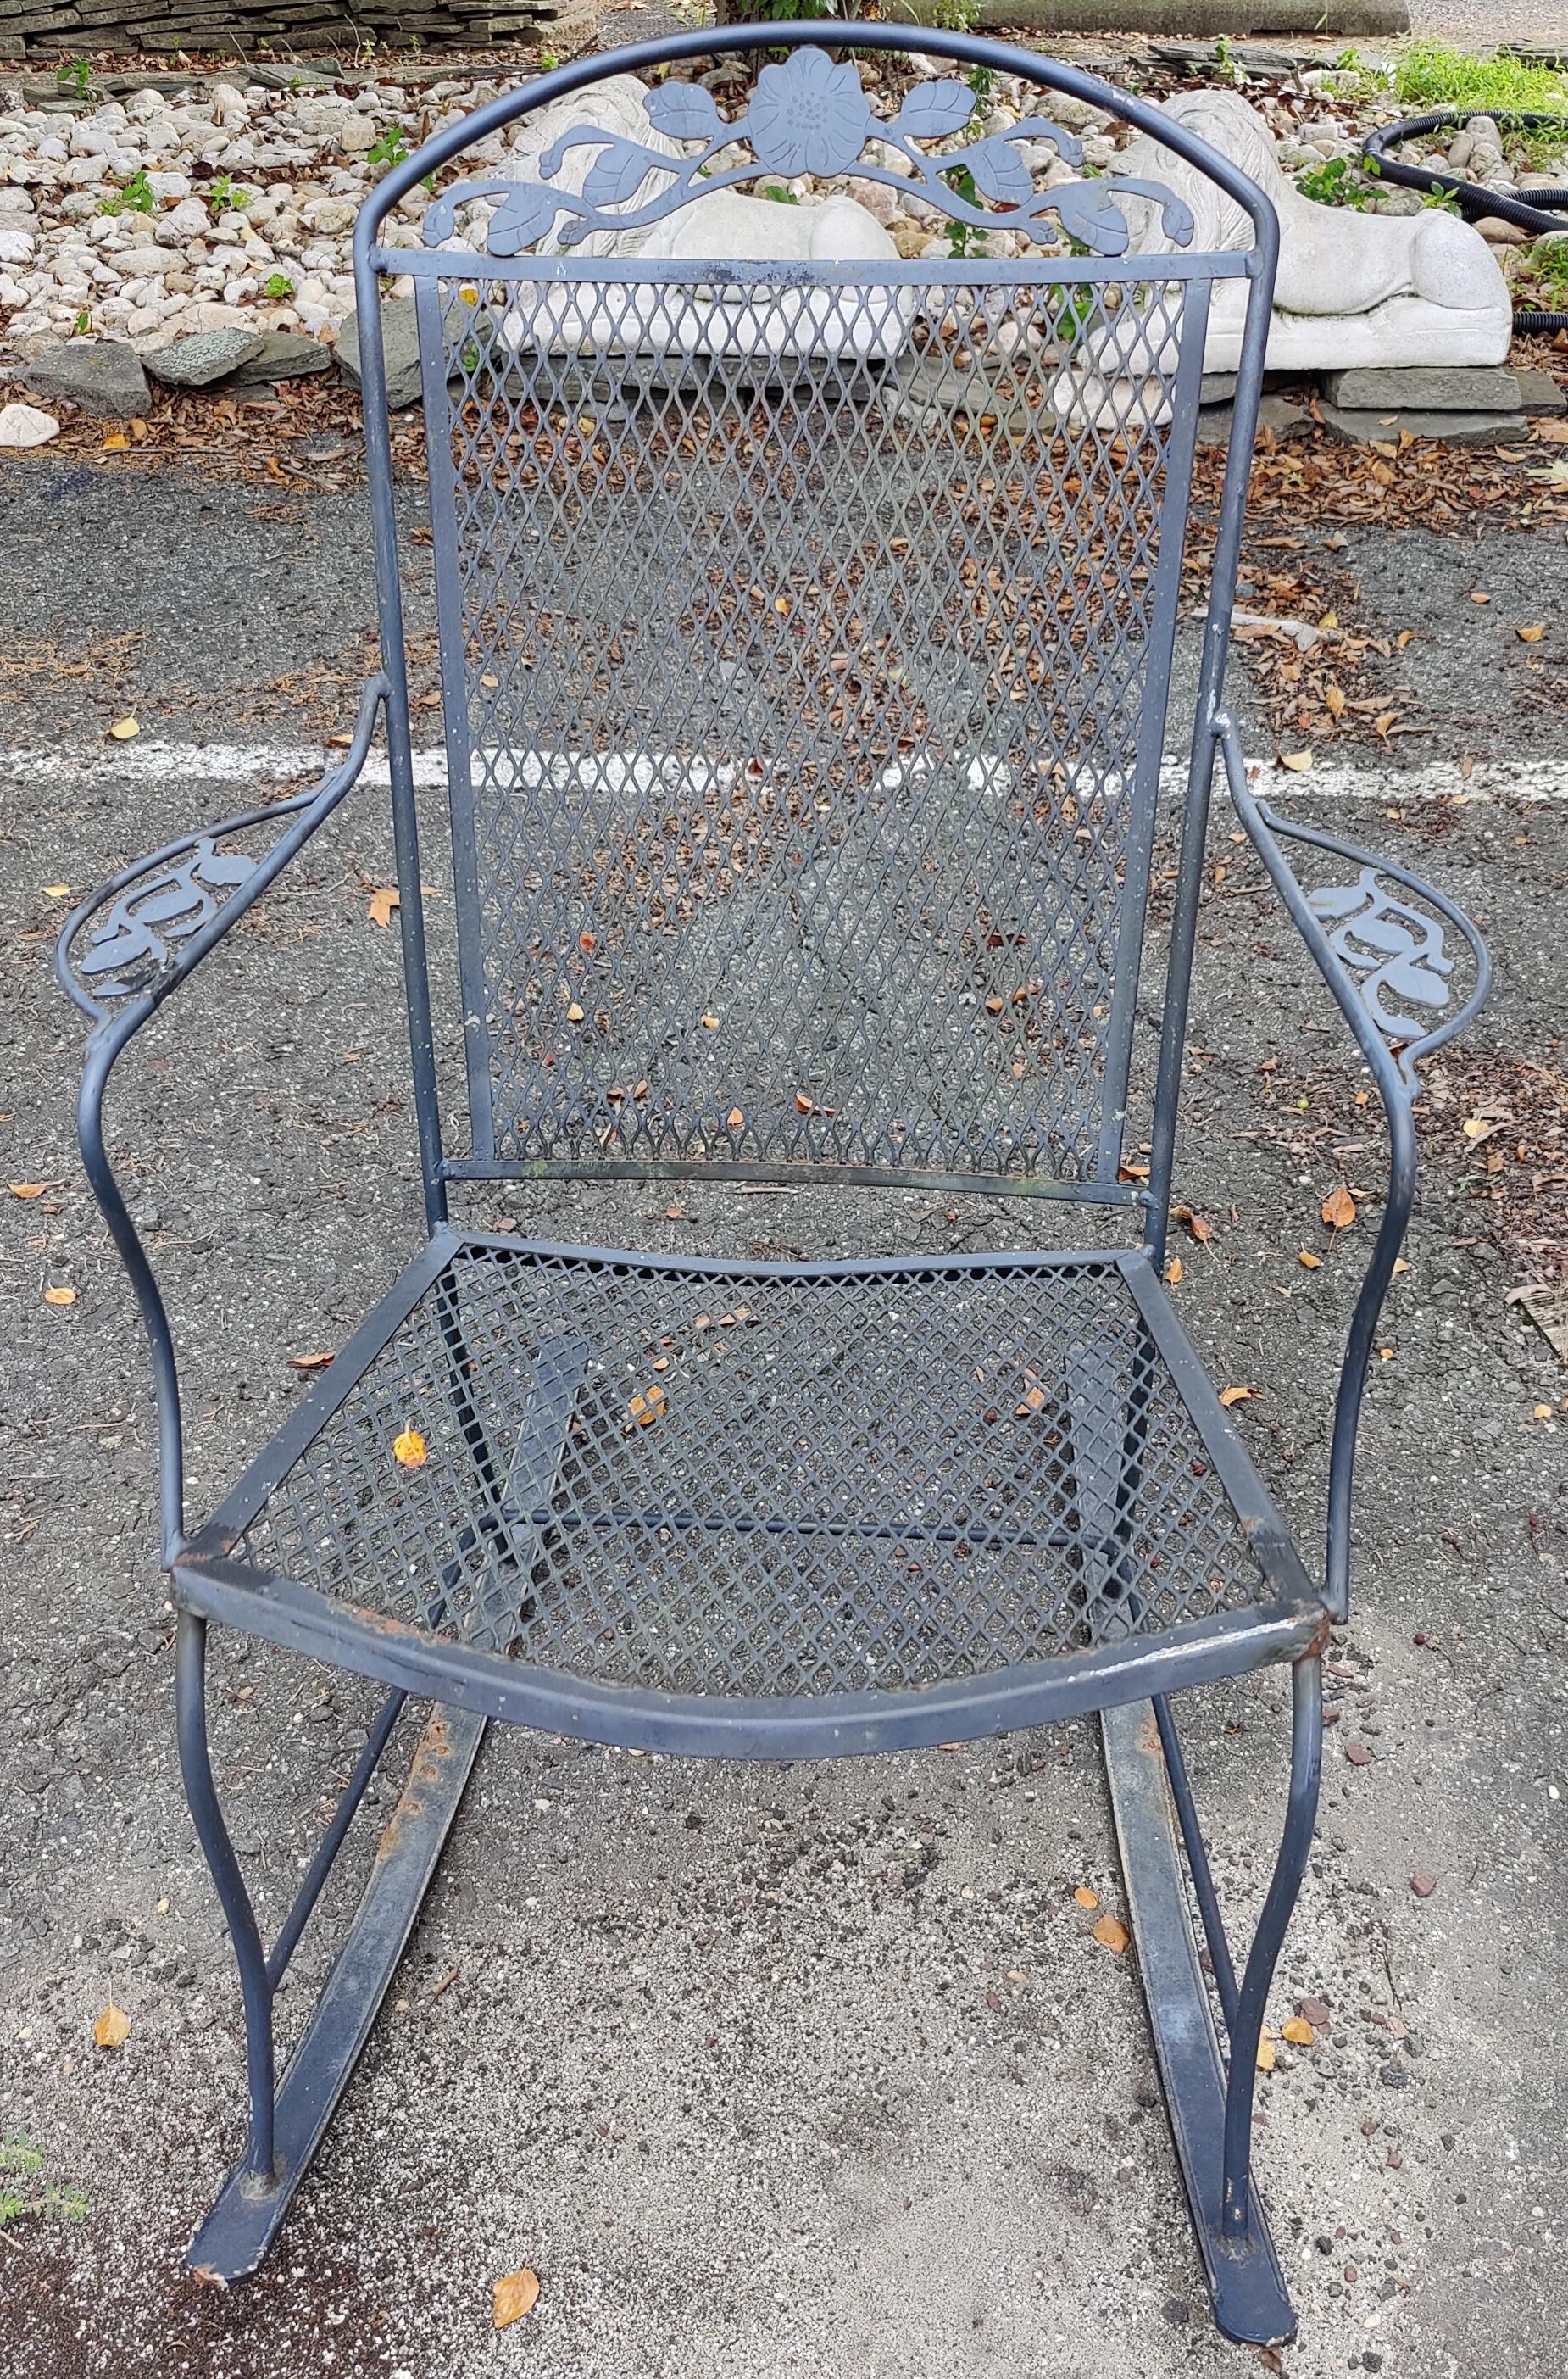 Mid-Century Modern iron patio rocking chair. This gorgeous rocker features elegant scrollwork and flower designs. Perfect for a deck, patio, or covered porch.

Please confirm item location (NY or NJ).